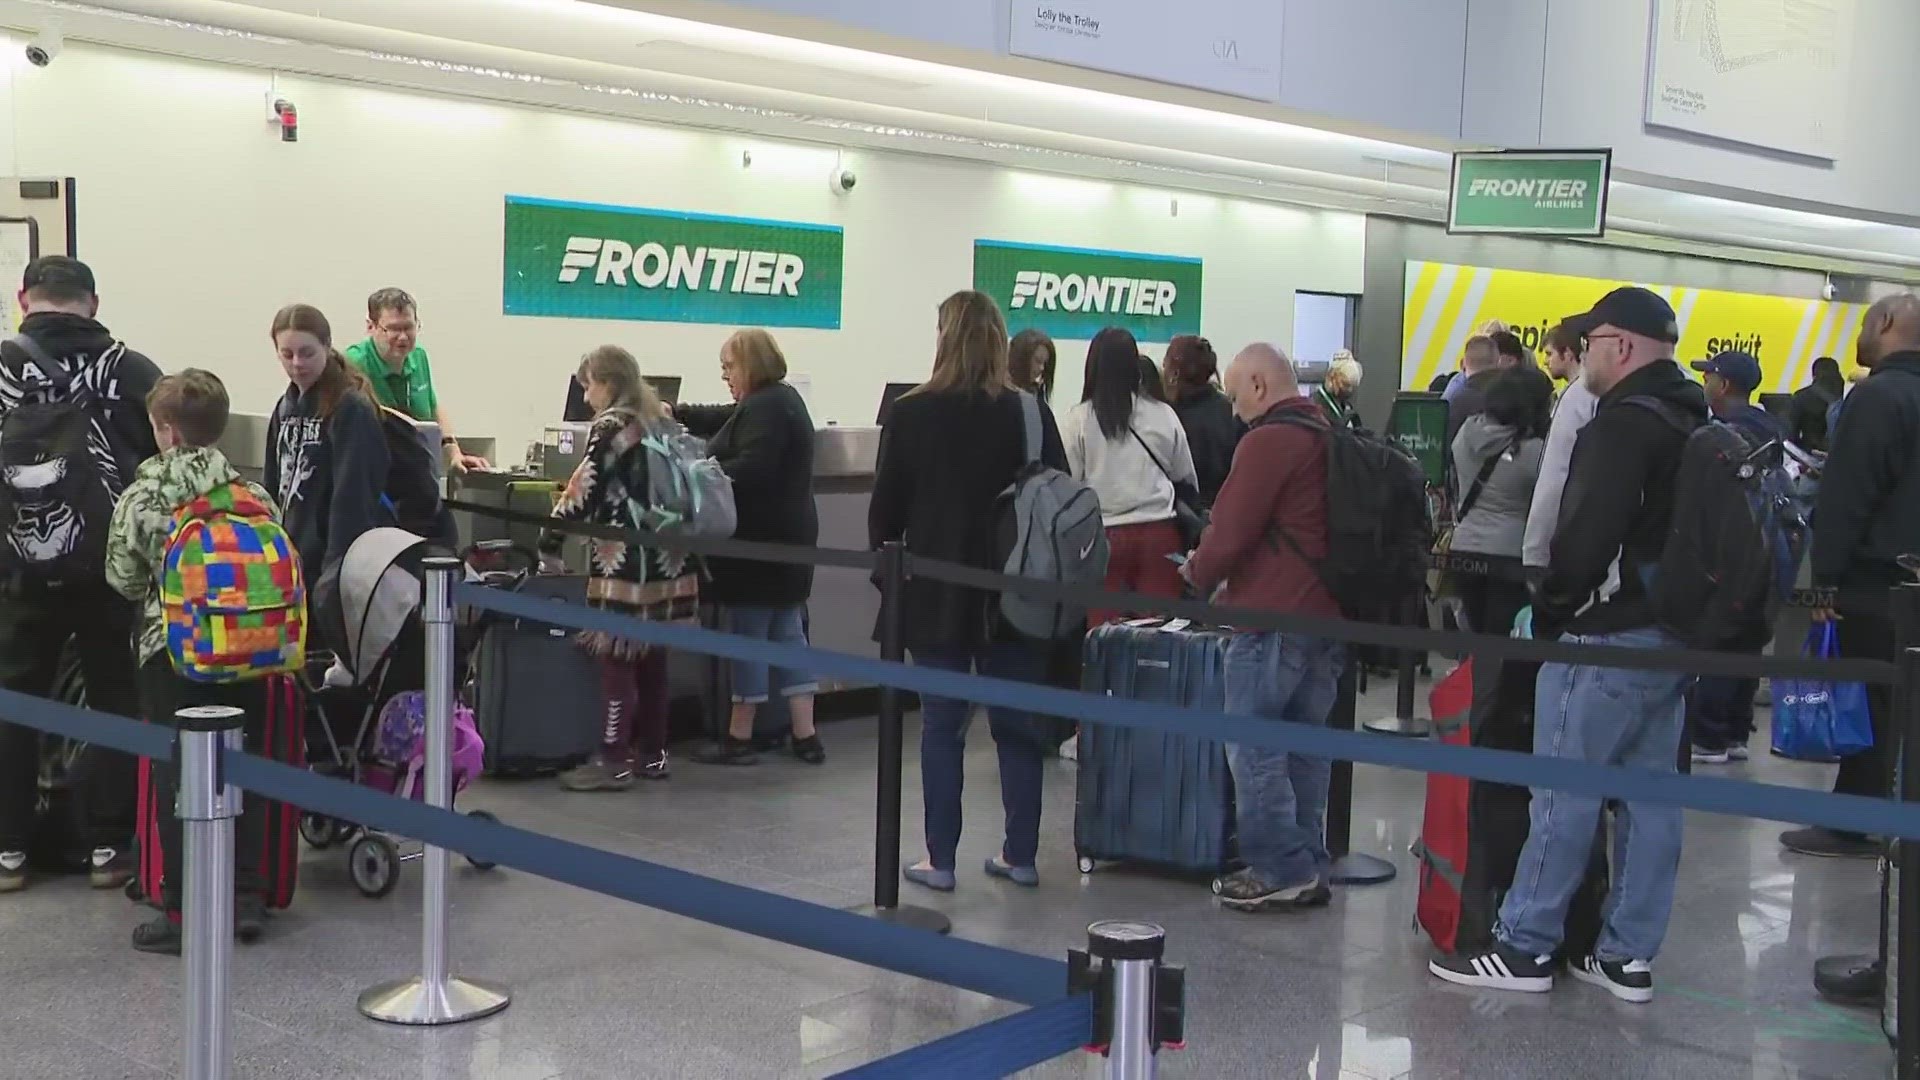 Frontier says their plans will bring hundreds of jobs to Cleveland within the first year.